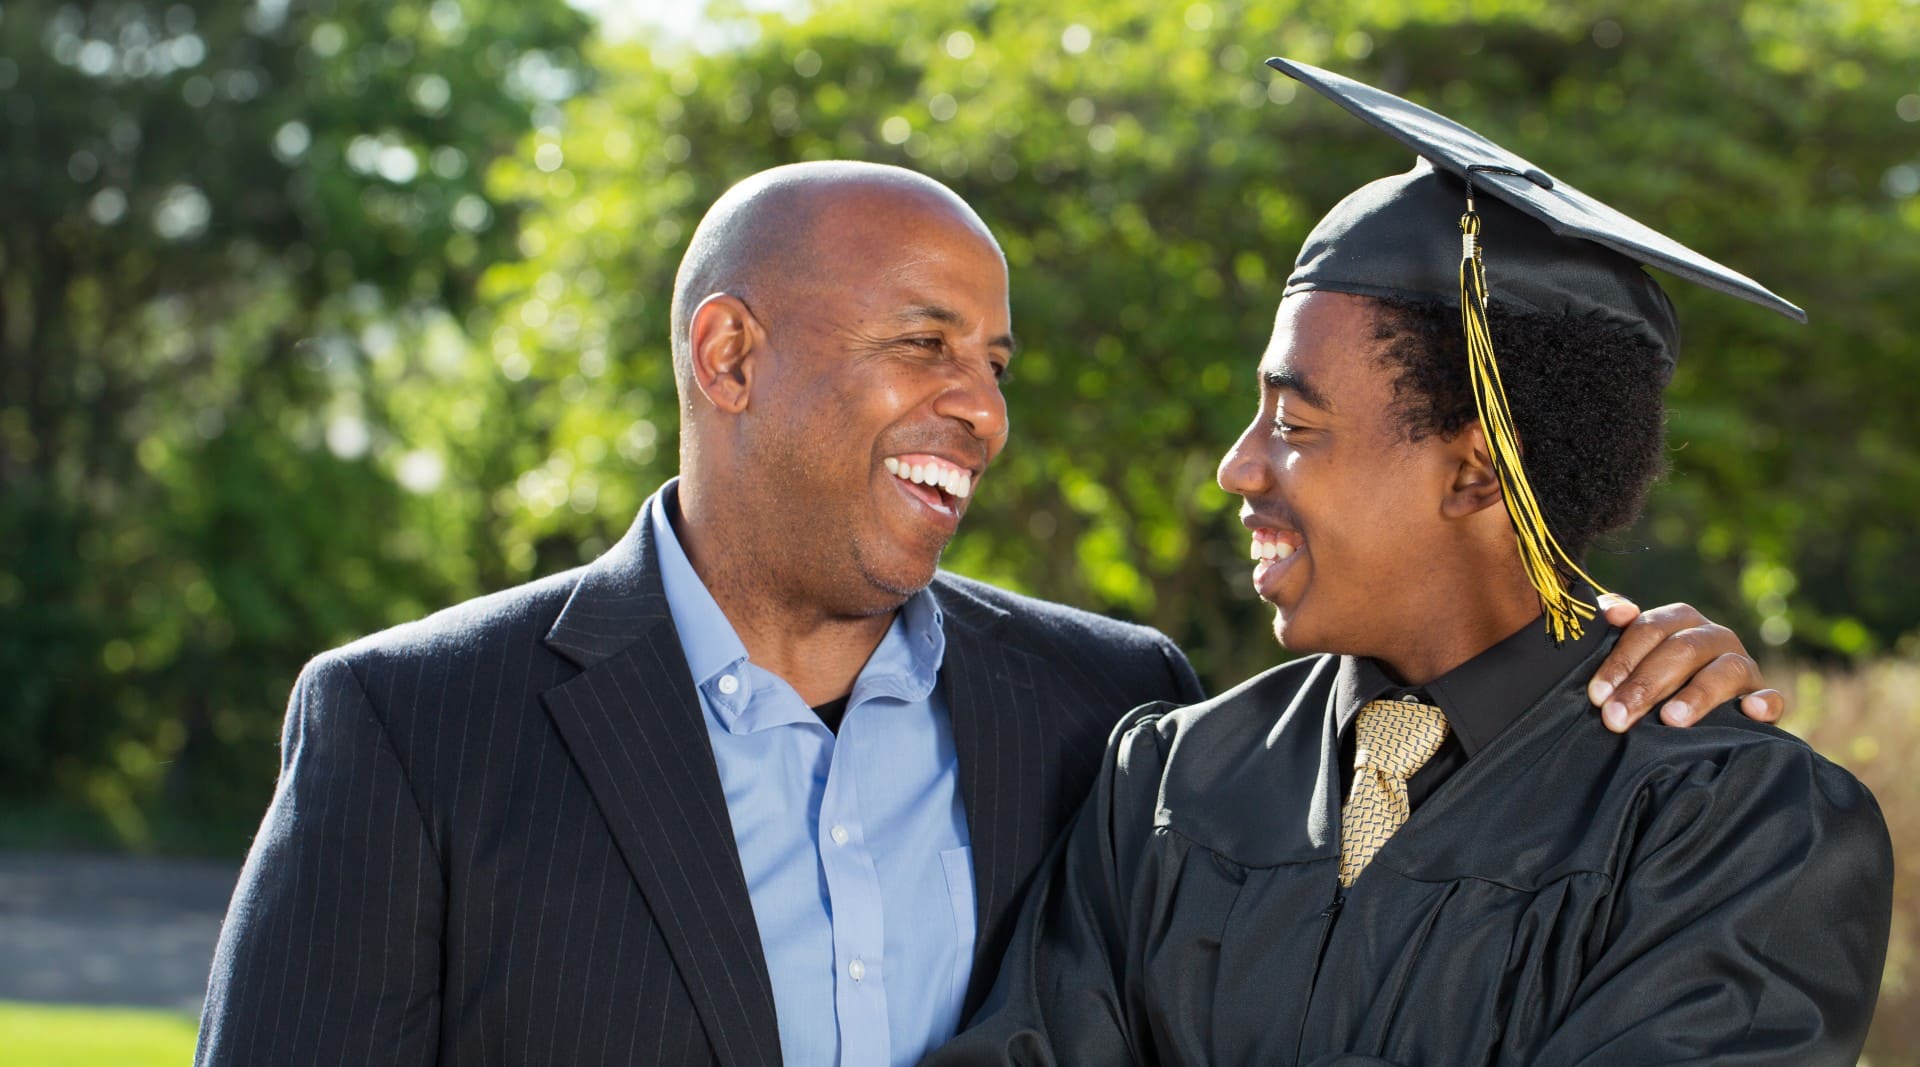 Dads and Grads: A Look At Father's Day and Graduation Shopping Plans